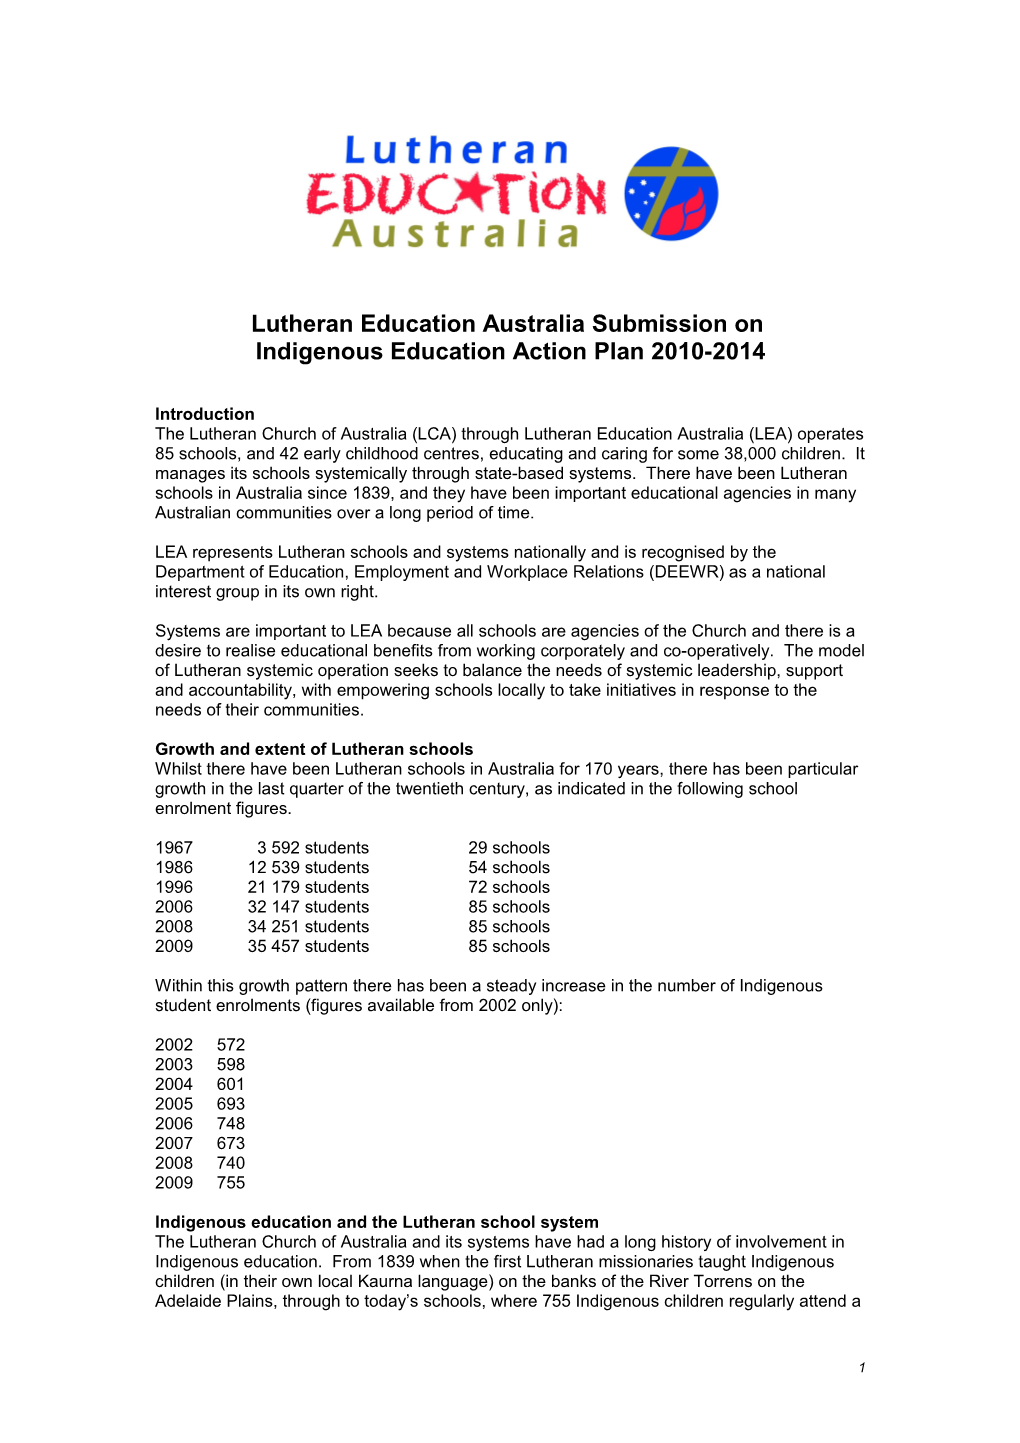 LEA Submission on the Indigenous Education Plan 2010-1014